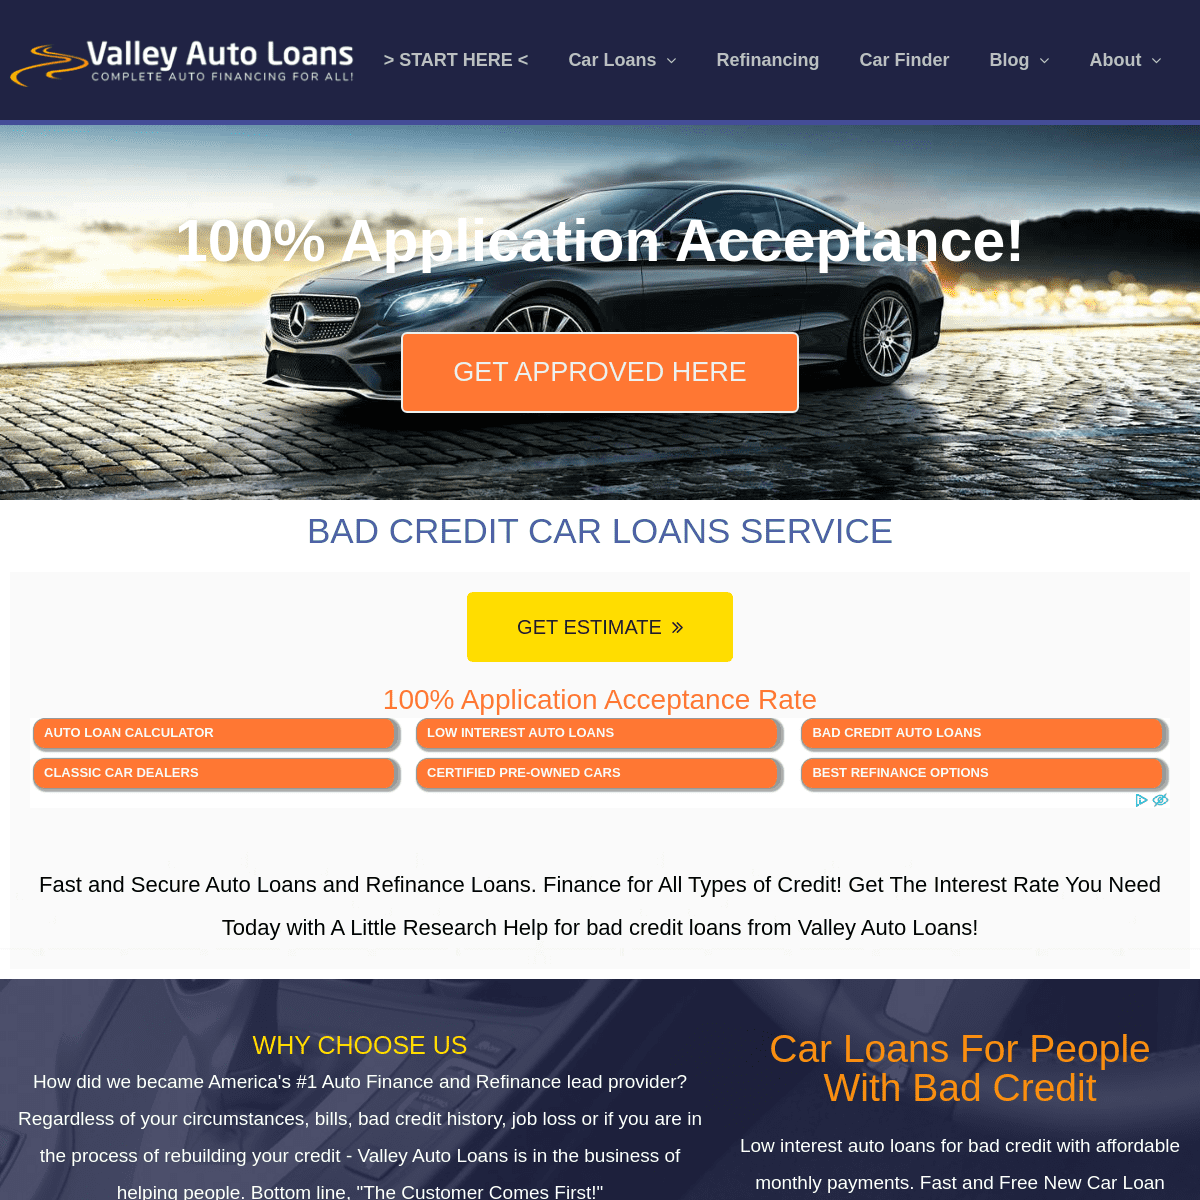 A complete backup of valleyautoloan.com